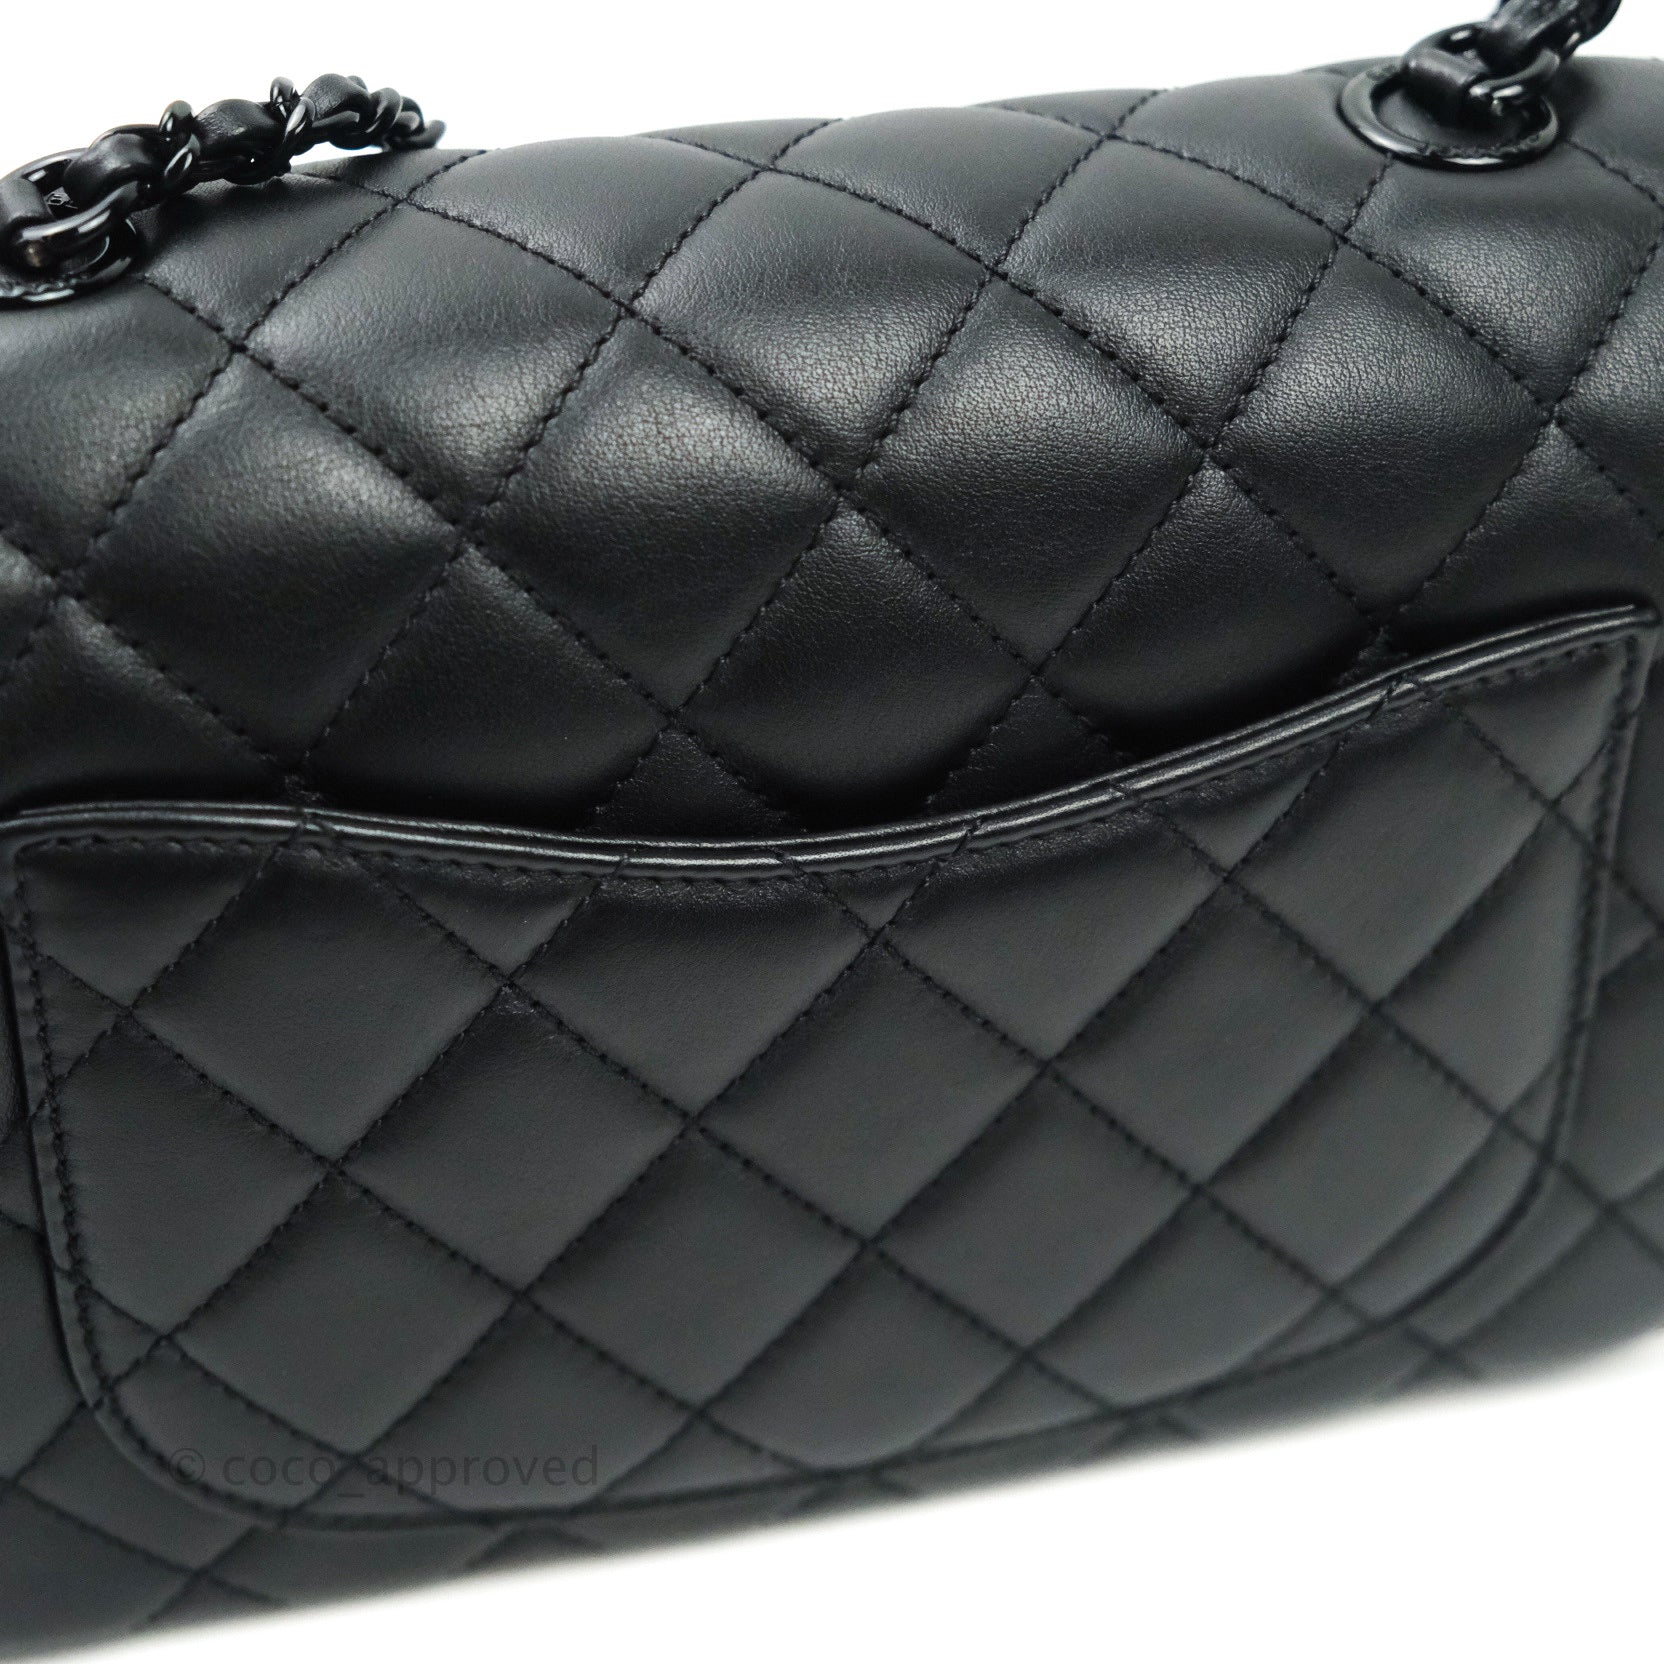 Chanel In The Loop Flap Bag Quilted Lambskin Small Black 670281